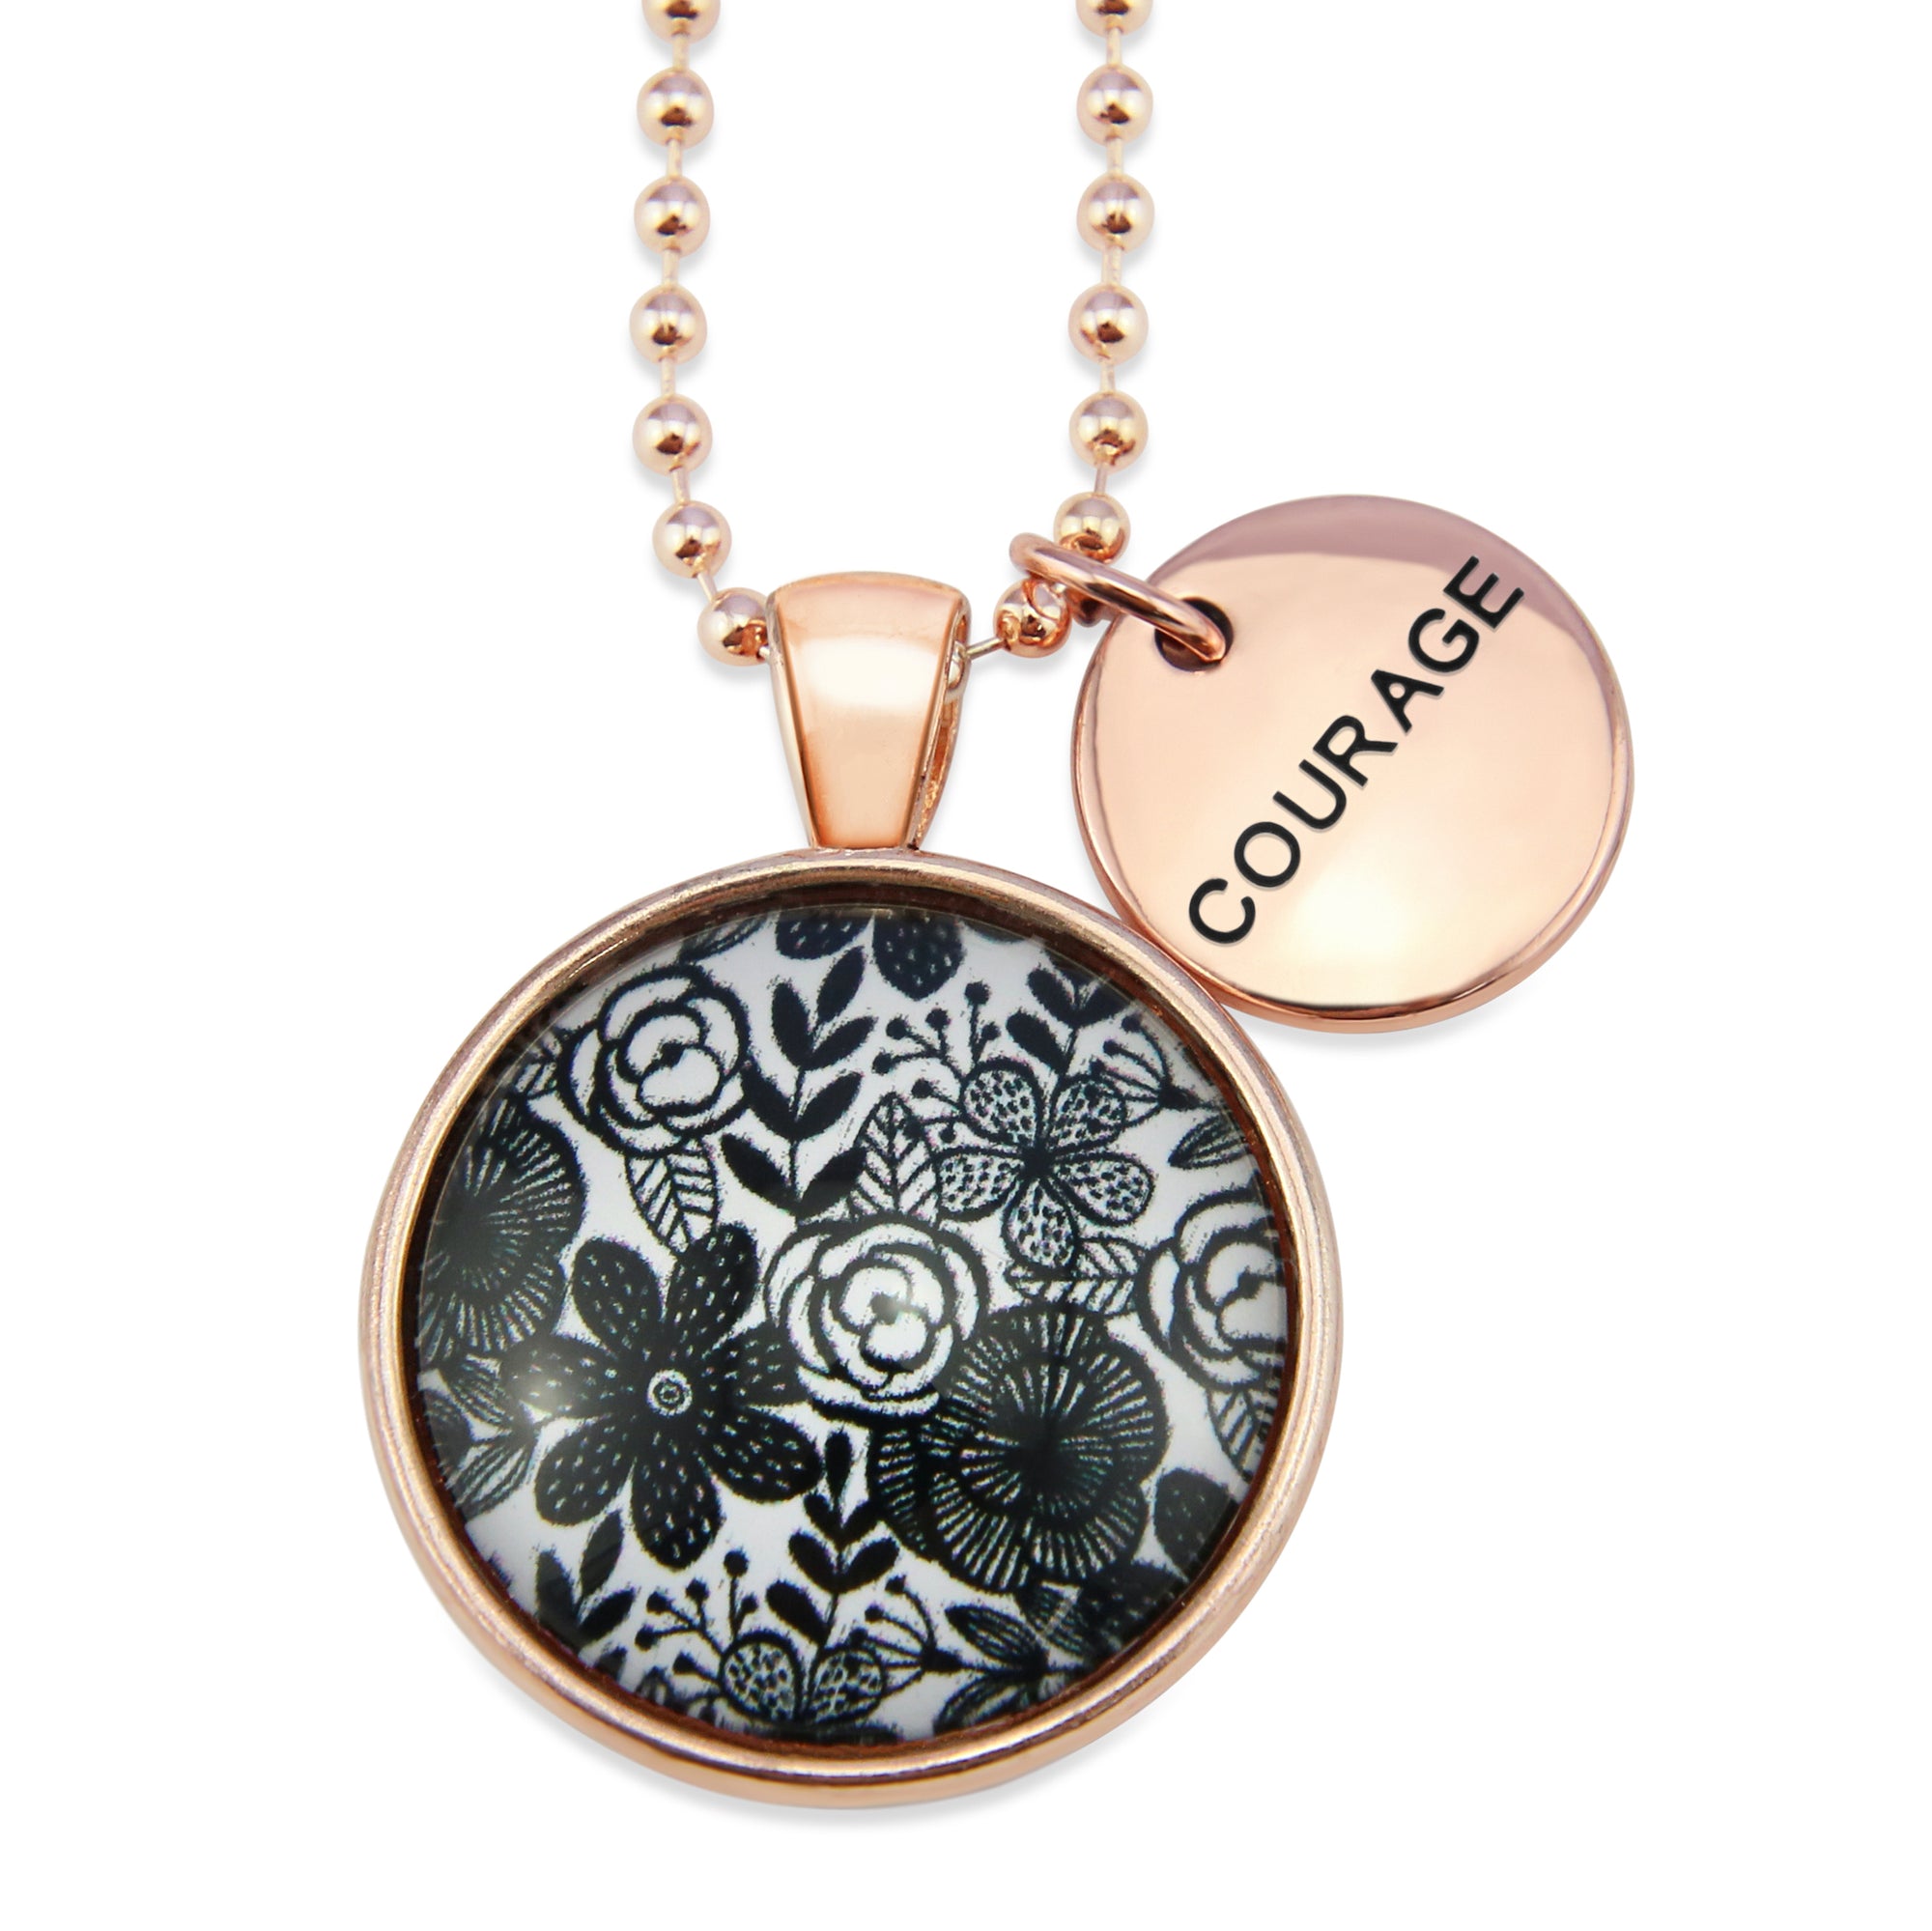 Black & White Collection - Rose Gold 'COURAGE' Necklace - Ebony Bloom (10443)